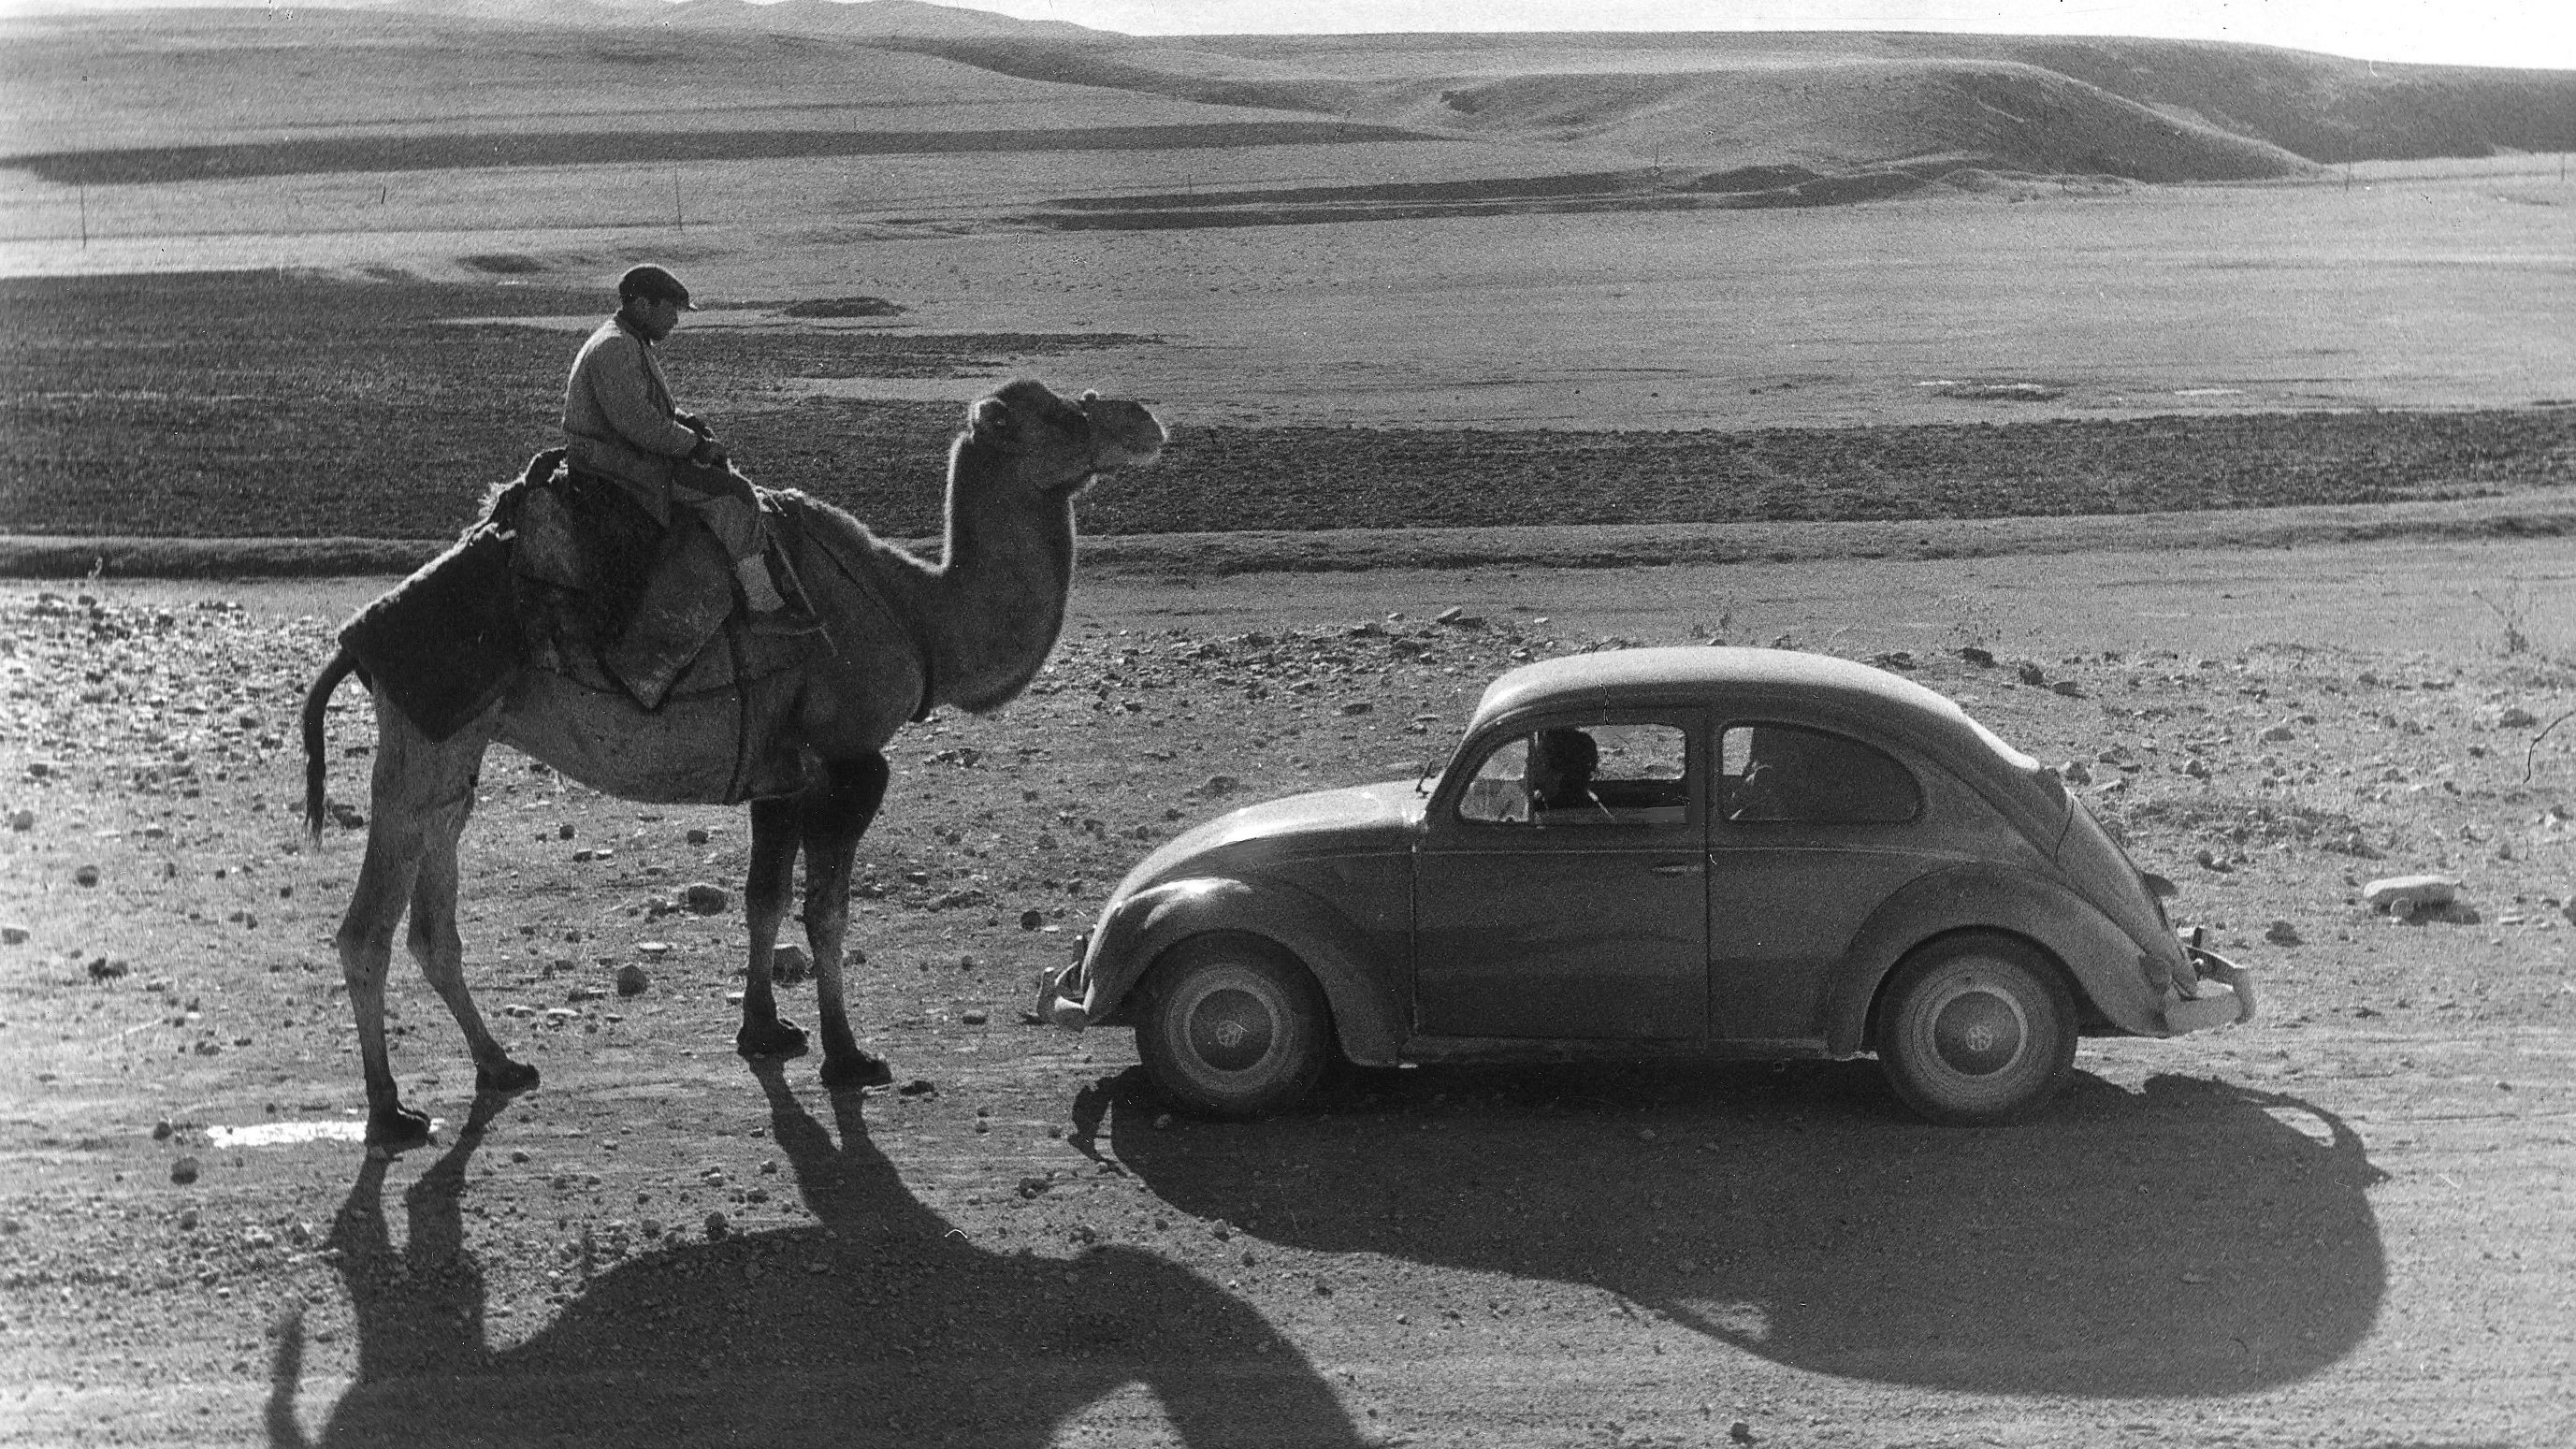  A man riding a camel in Turkey encounters a Beetle on the road from Istanbul and Ankara.  
